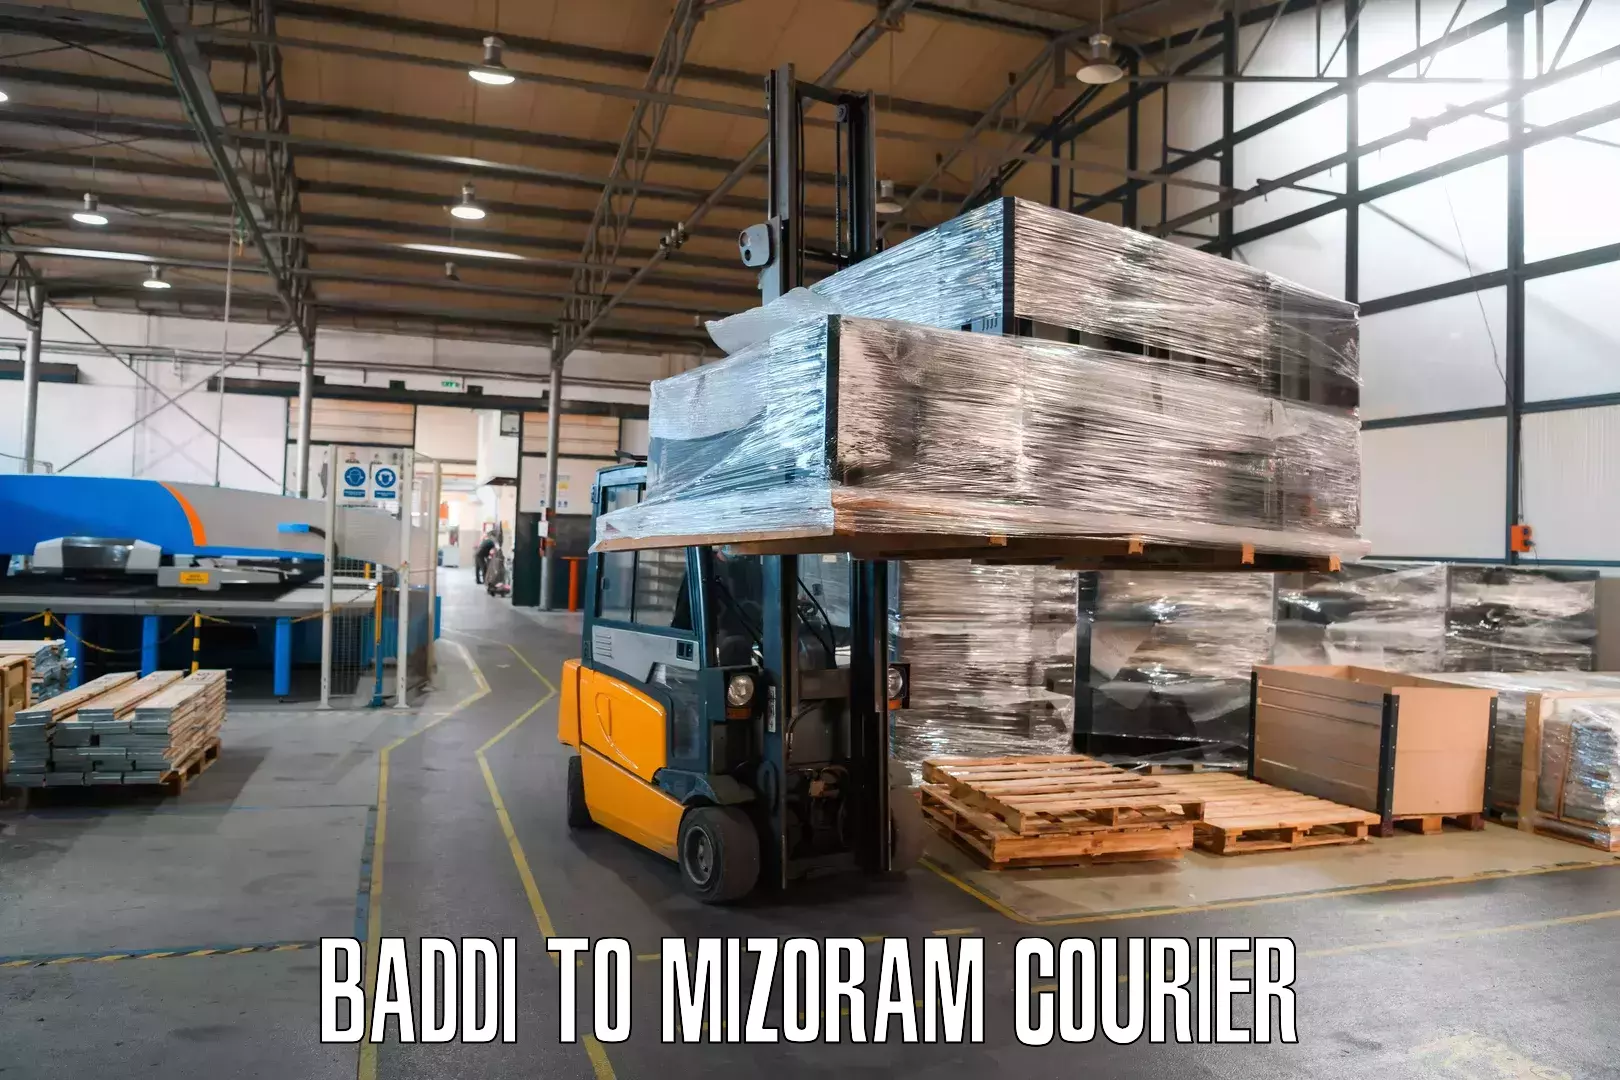 Courier service innovation Baddi to Darlawn